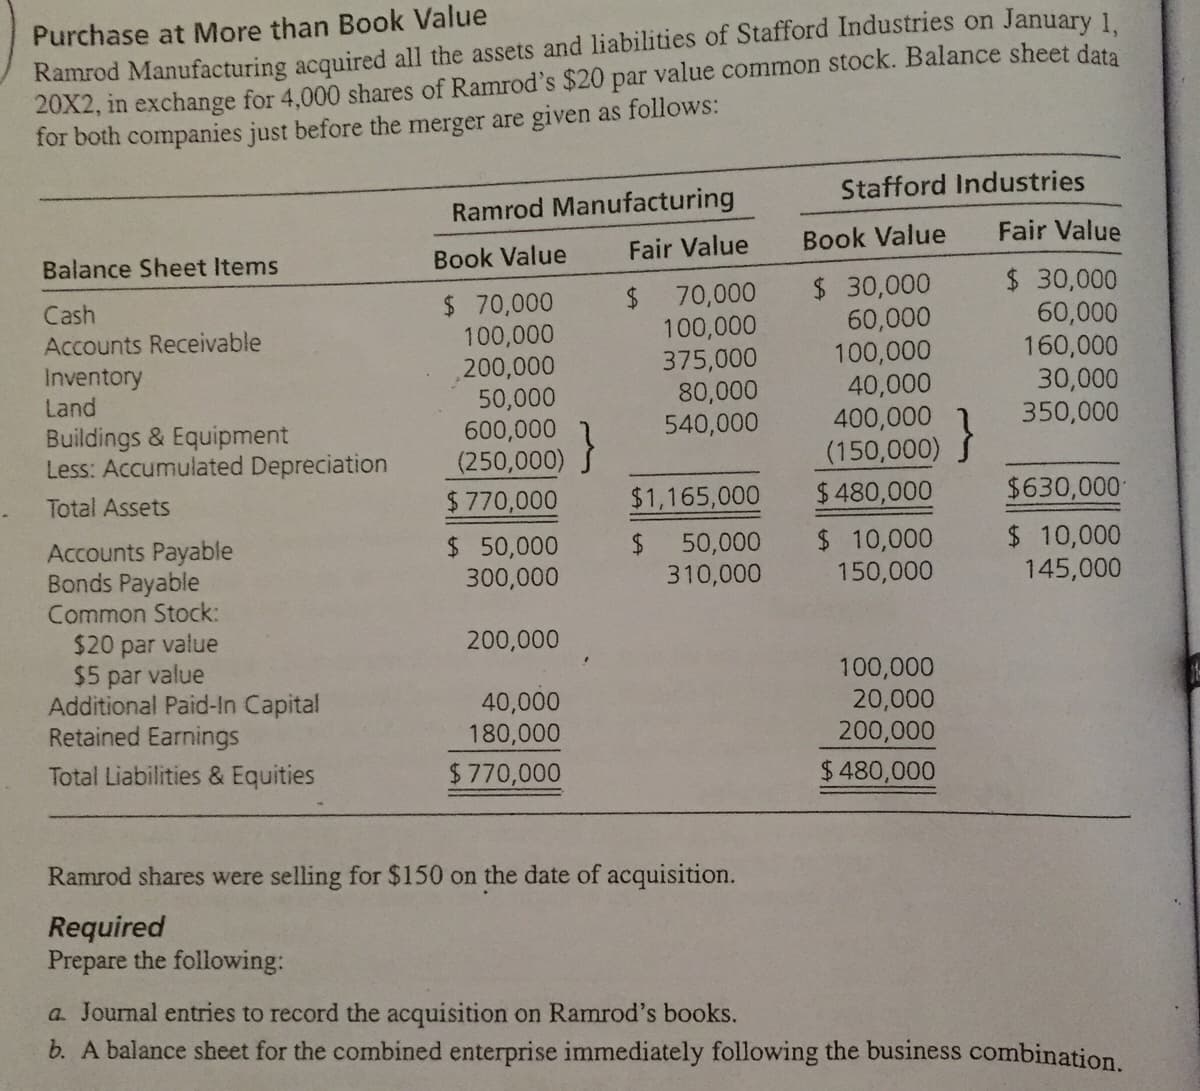 Purchase at More than Book Value
Ramrod Manufacturing acquired all the assets and liabilities of Stafford Industries on January1
20X2, in exchange for 4,000 shares of Ramrod's $20 par value common stock. Balance sheet data
for both companies just before the merger are given as follows:
Stafford Industries
Ramrod Manufacturing
Book Value
Fair Value
Fair Value
Balance Sheet Items
Book Value
$ 30,000
60,000
160,000
30,000
350,000
$ 30,000
60,000
100,000
40,000
400,000
(150,000)
$ 480,000
$ 10,000
150,000
$ 70,000
100,000
200,000
50,000
600,000
(250,000)
$770,000
70,000
100,000
375,000
80,000
540,000
Cash
Accounts Receivable
Inventory
Land
Buildings & Equipment
Less: Accumulated Depreciation
}
$630,000
$ 10,000
145,000
Total Assets
$1,165,000
Accounts Payable
Bonds Payable
Common Stock:
$ 50,000
300,000
$ 50,000
310,000
200,000
$20 par value
$5 par value
Additional Paid-In Capital
Retained Earnings
100,000
20,000
40,000
180,000
$770,000
200,000
$ 480,000
Total Liabilities & Equities
%$4
Ramrod shares were selling for $150 on
date of acquisition.
Required
Prepare the following:
a. Journal entries to record the acquisition on Ramrod's books.
b. A balance sheet for the combined enterprise immediately following the business combination.
